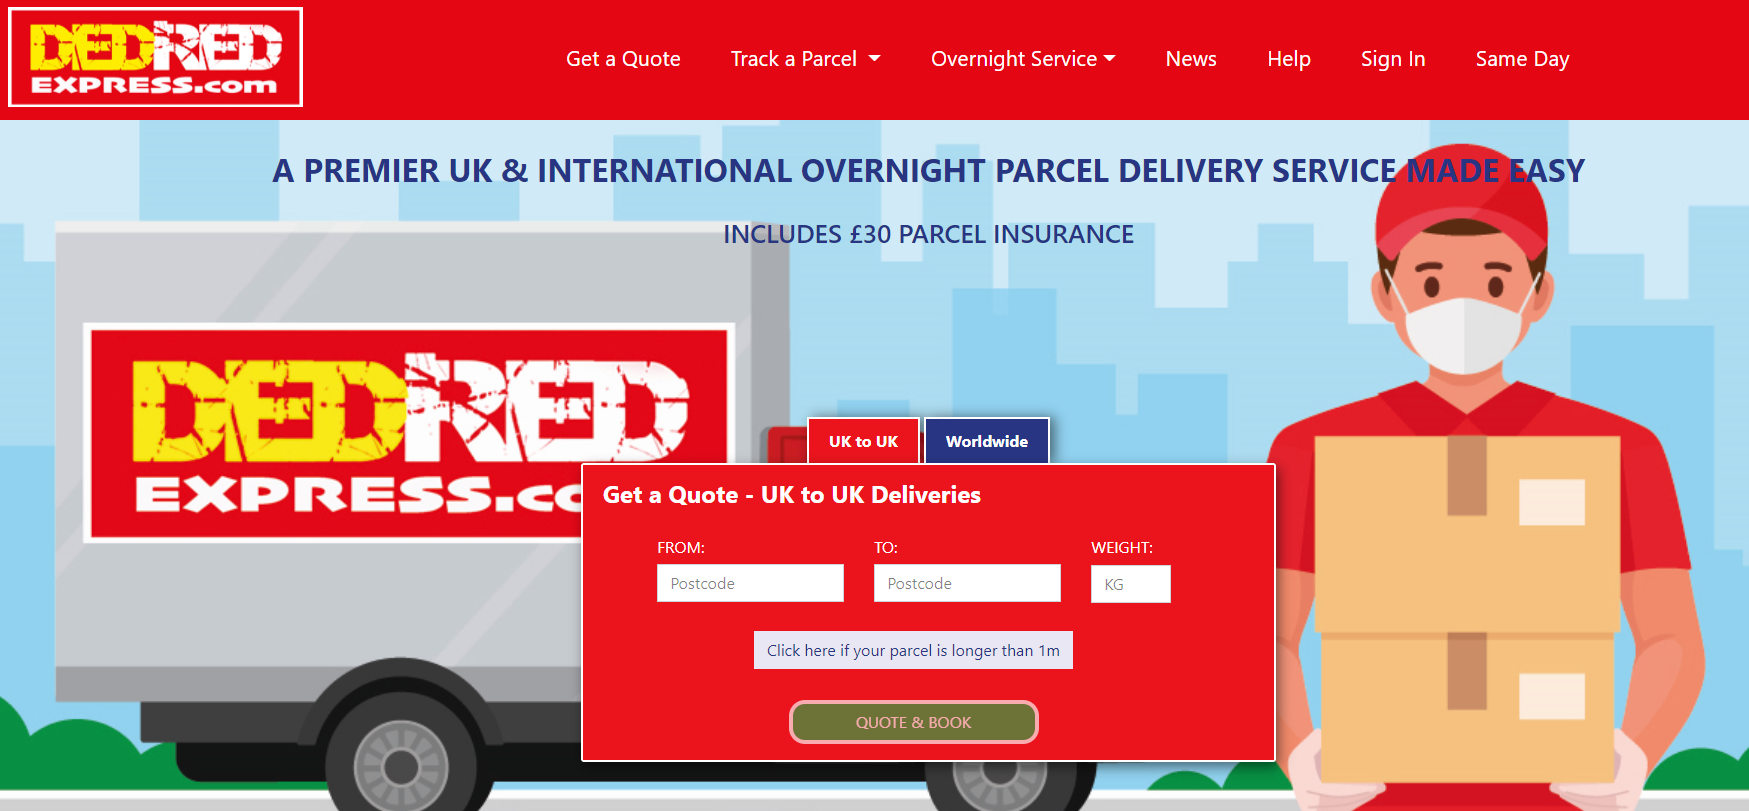 https://bvccouriers.co.uk/wp-content/uploads/2021/10/Dedred-Express-banner-out-now.png